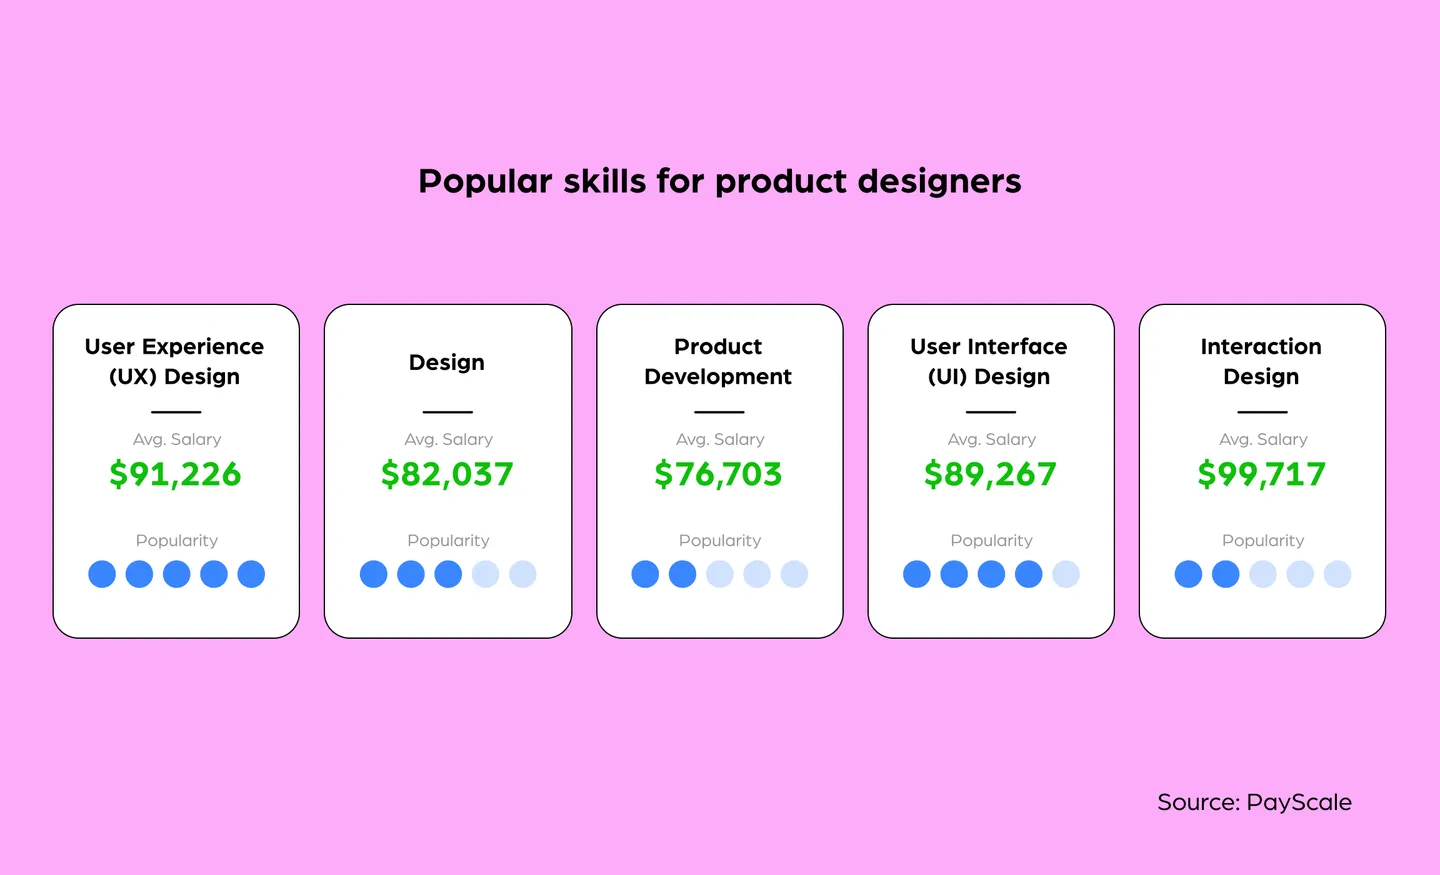 Top skills for product designers. Source: PayScale